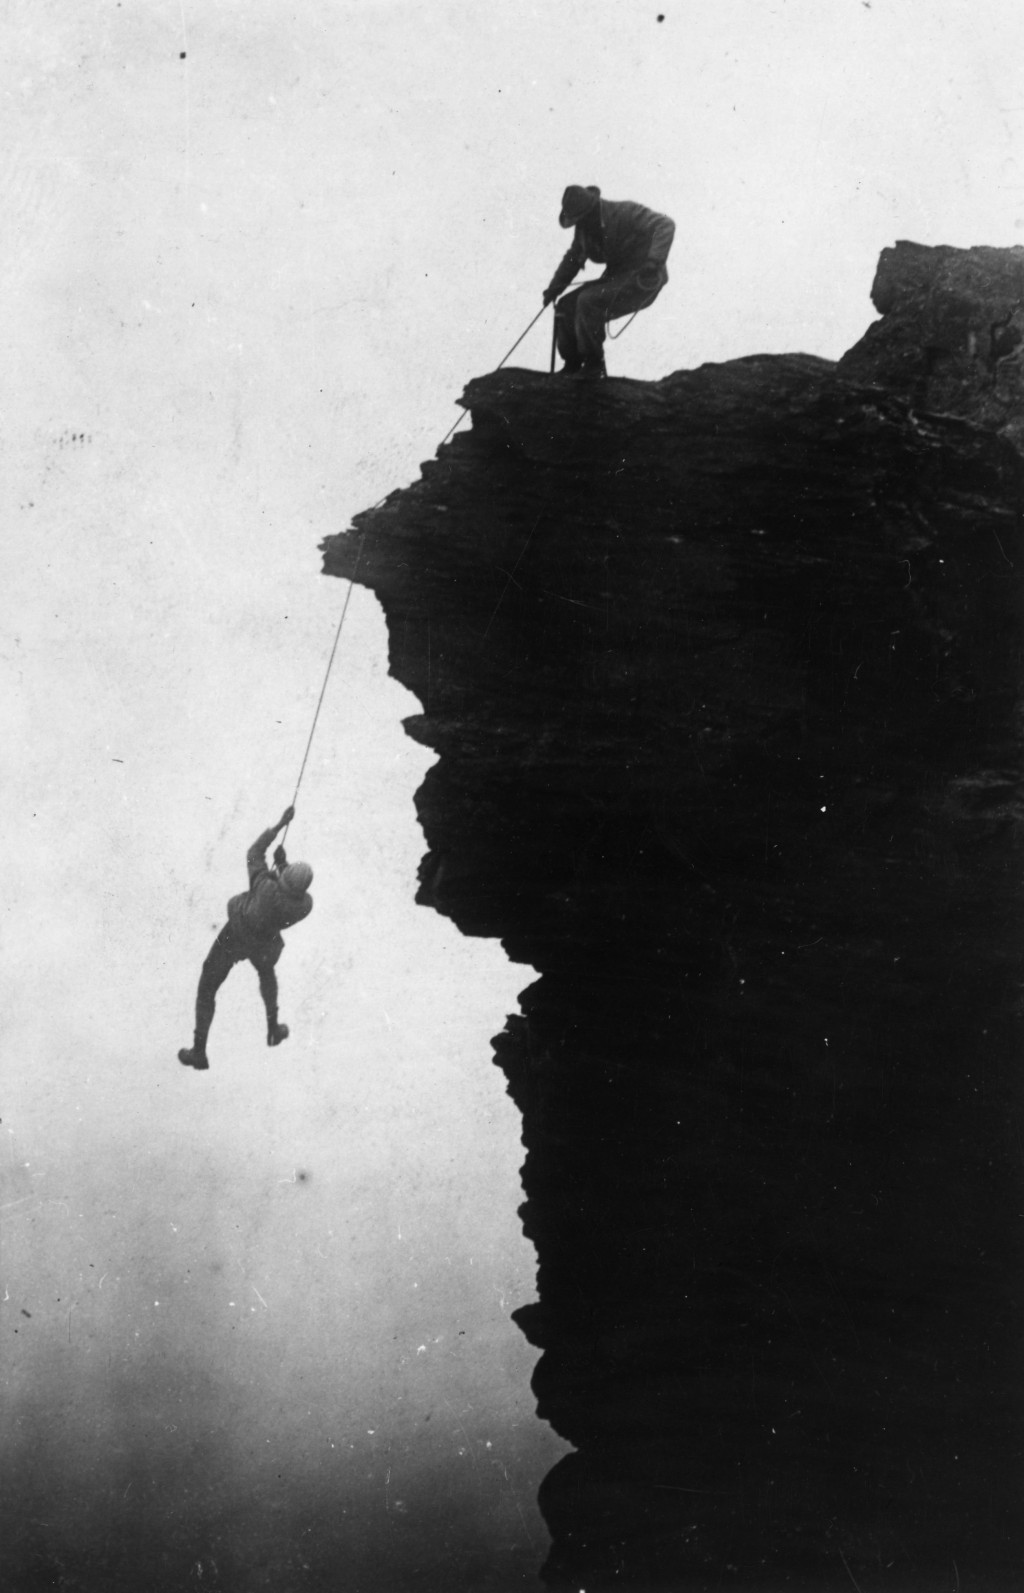 circa 1900:  A rock climber swinging on a rope as he is hauled up a cliff face.  (Photo by Hulton Archive/Getty Images)